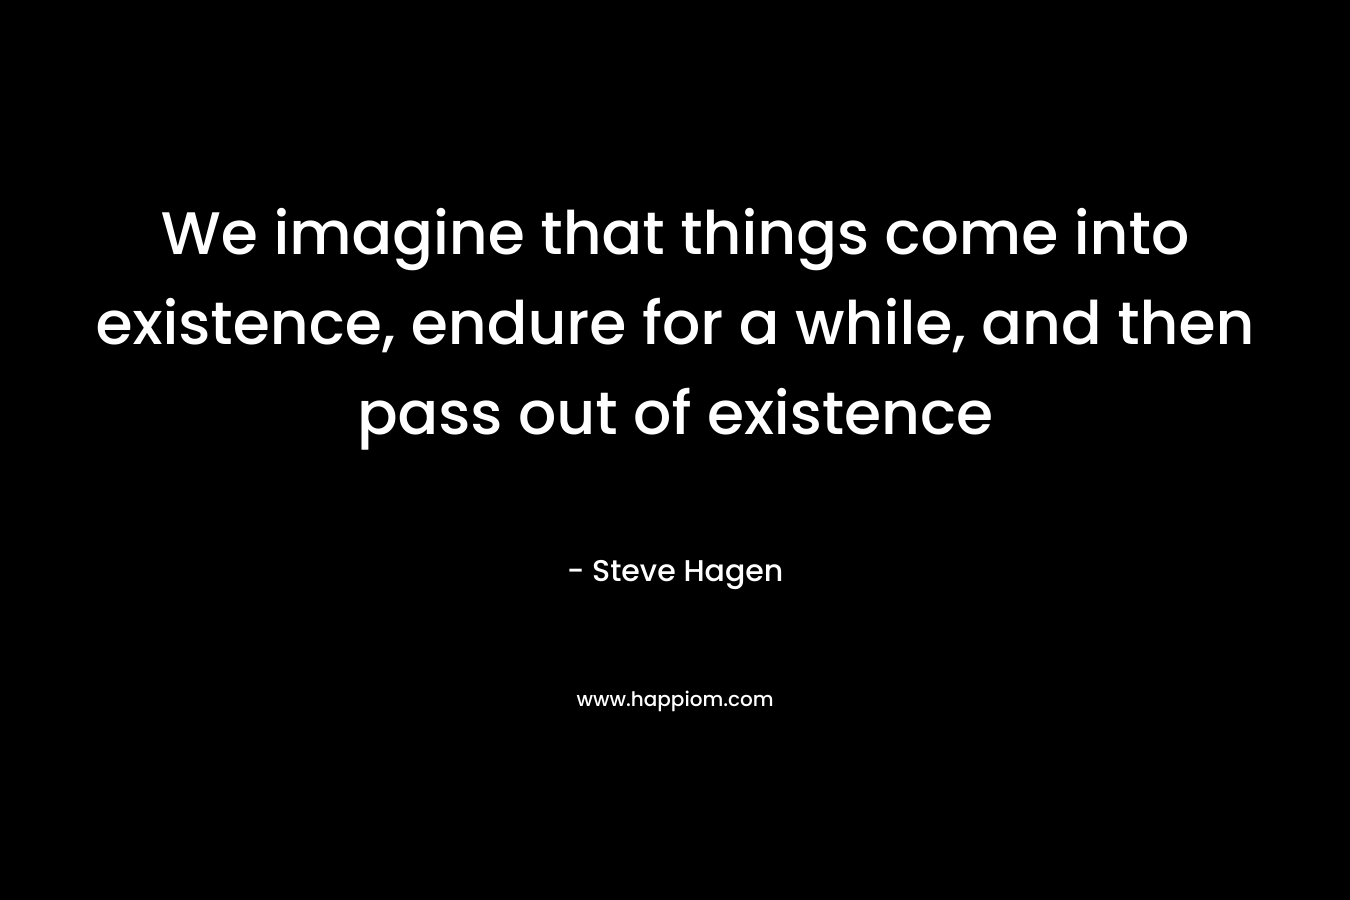 We imagine that things come into existence, endure for a while, and then pass out of existence – Steve Hagen